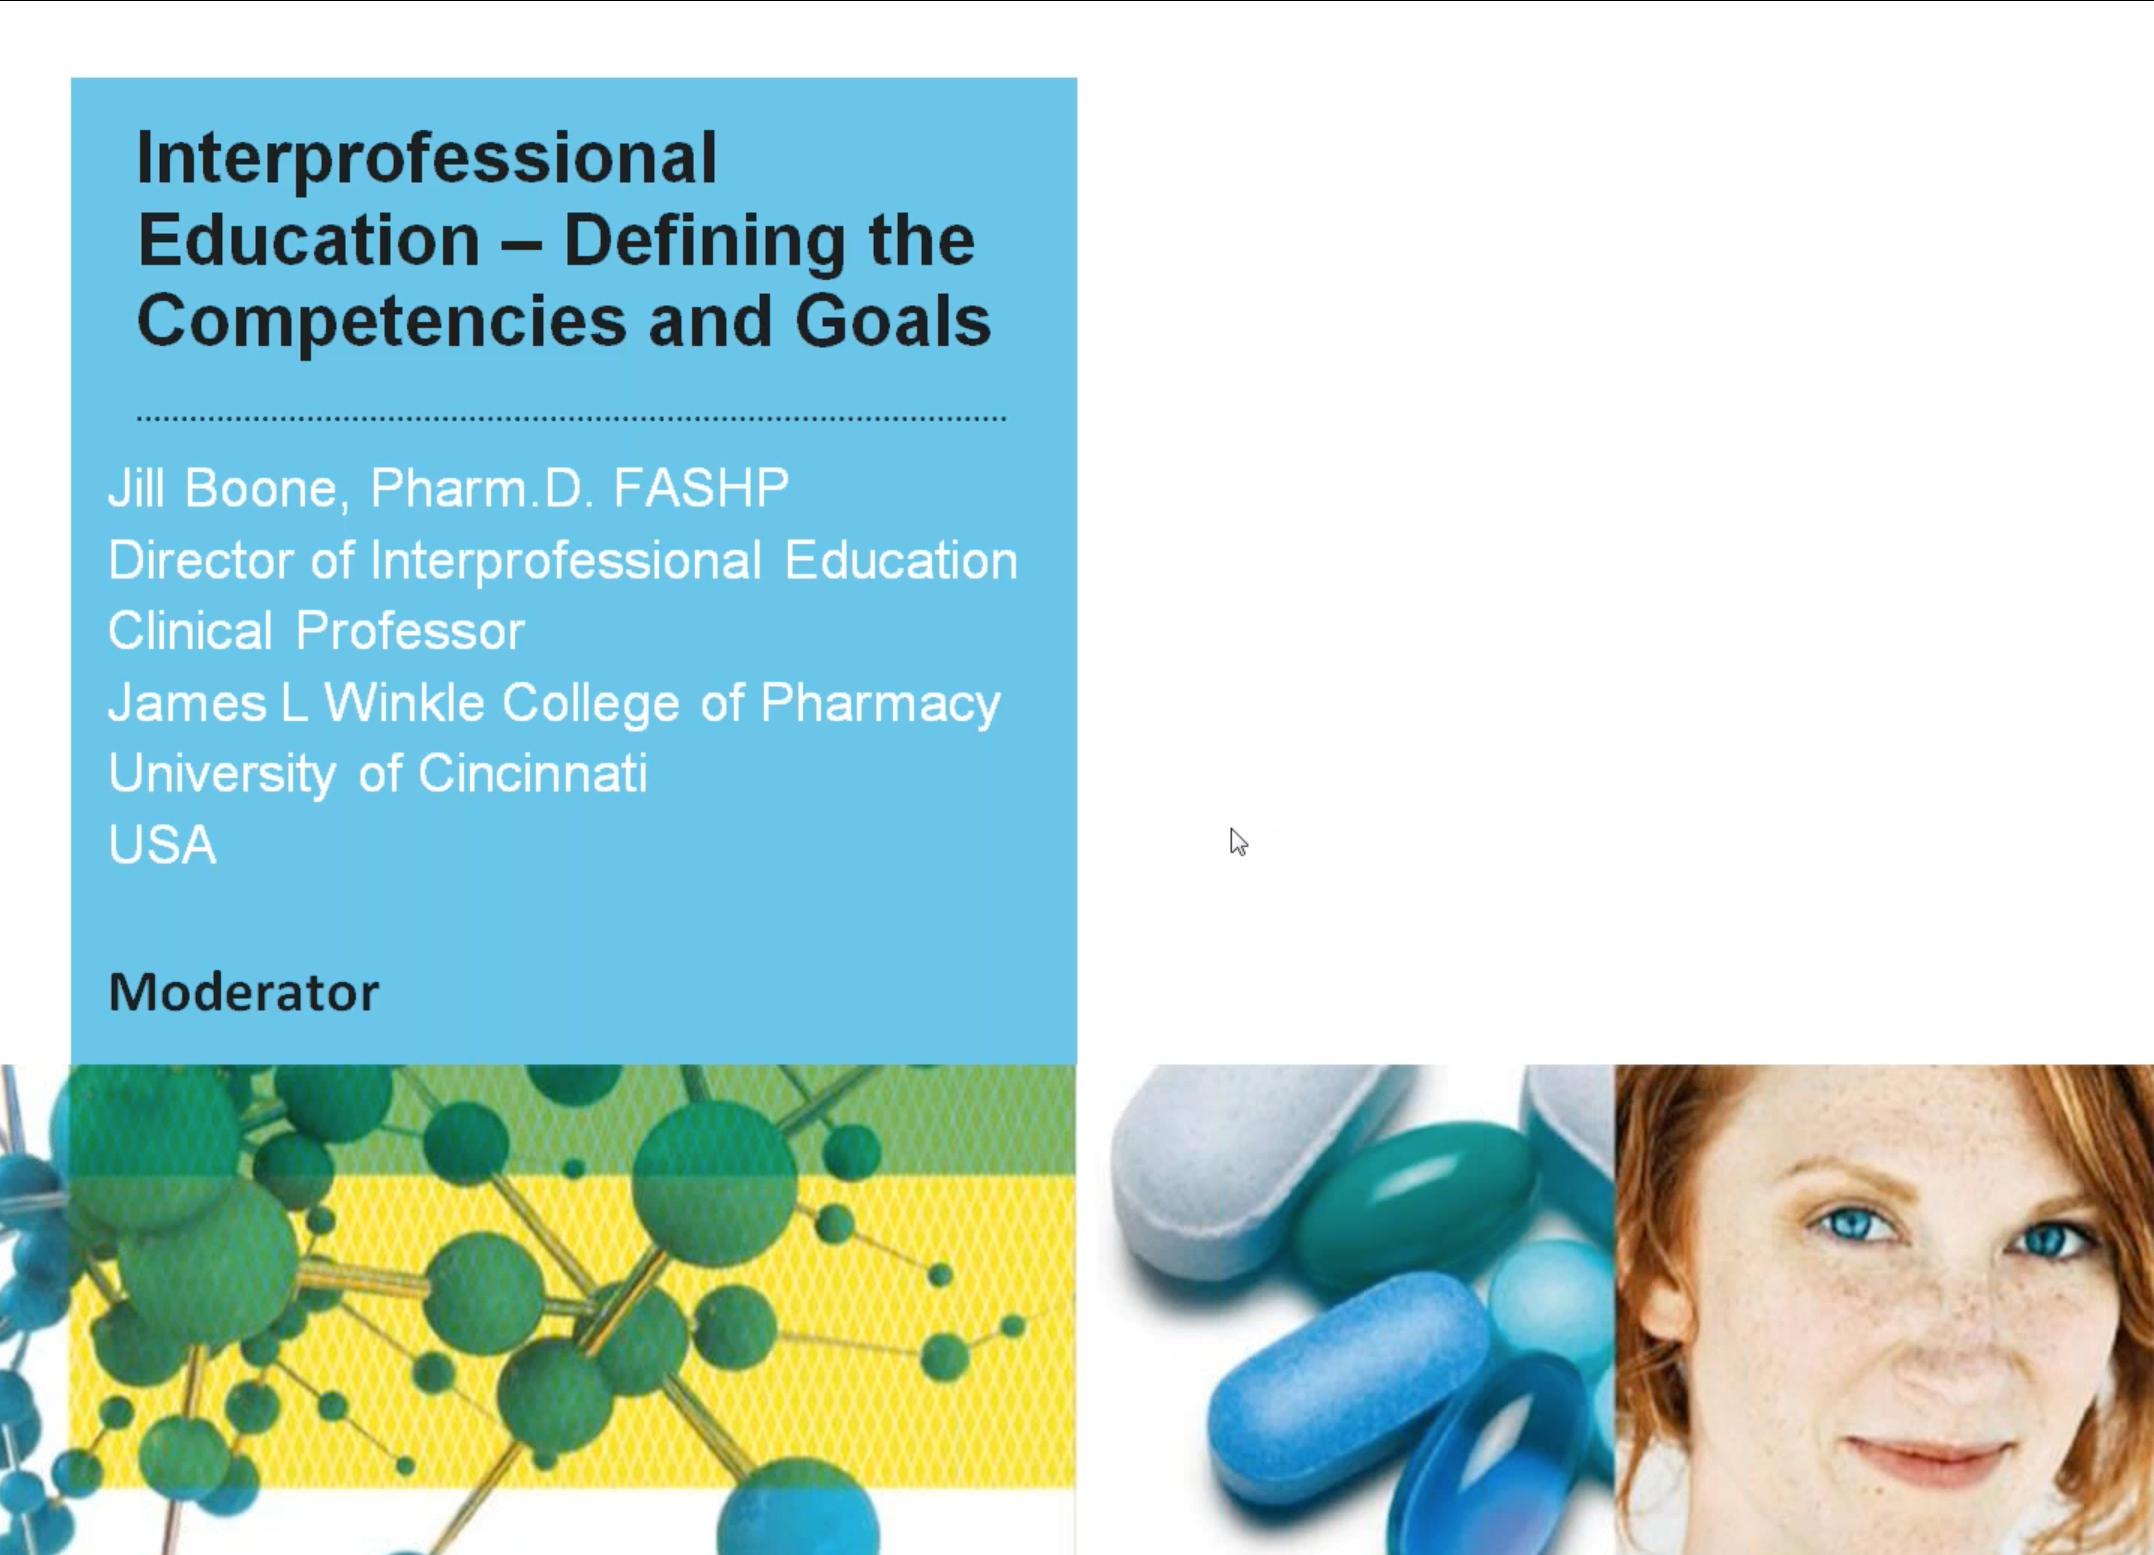 Interprofessional Education: Defining the Competencies and Goals Thumbnail